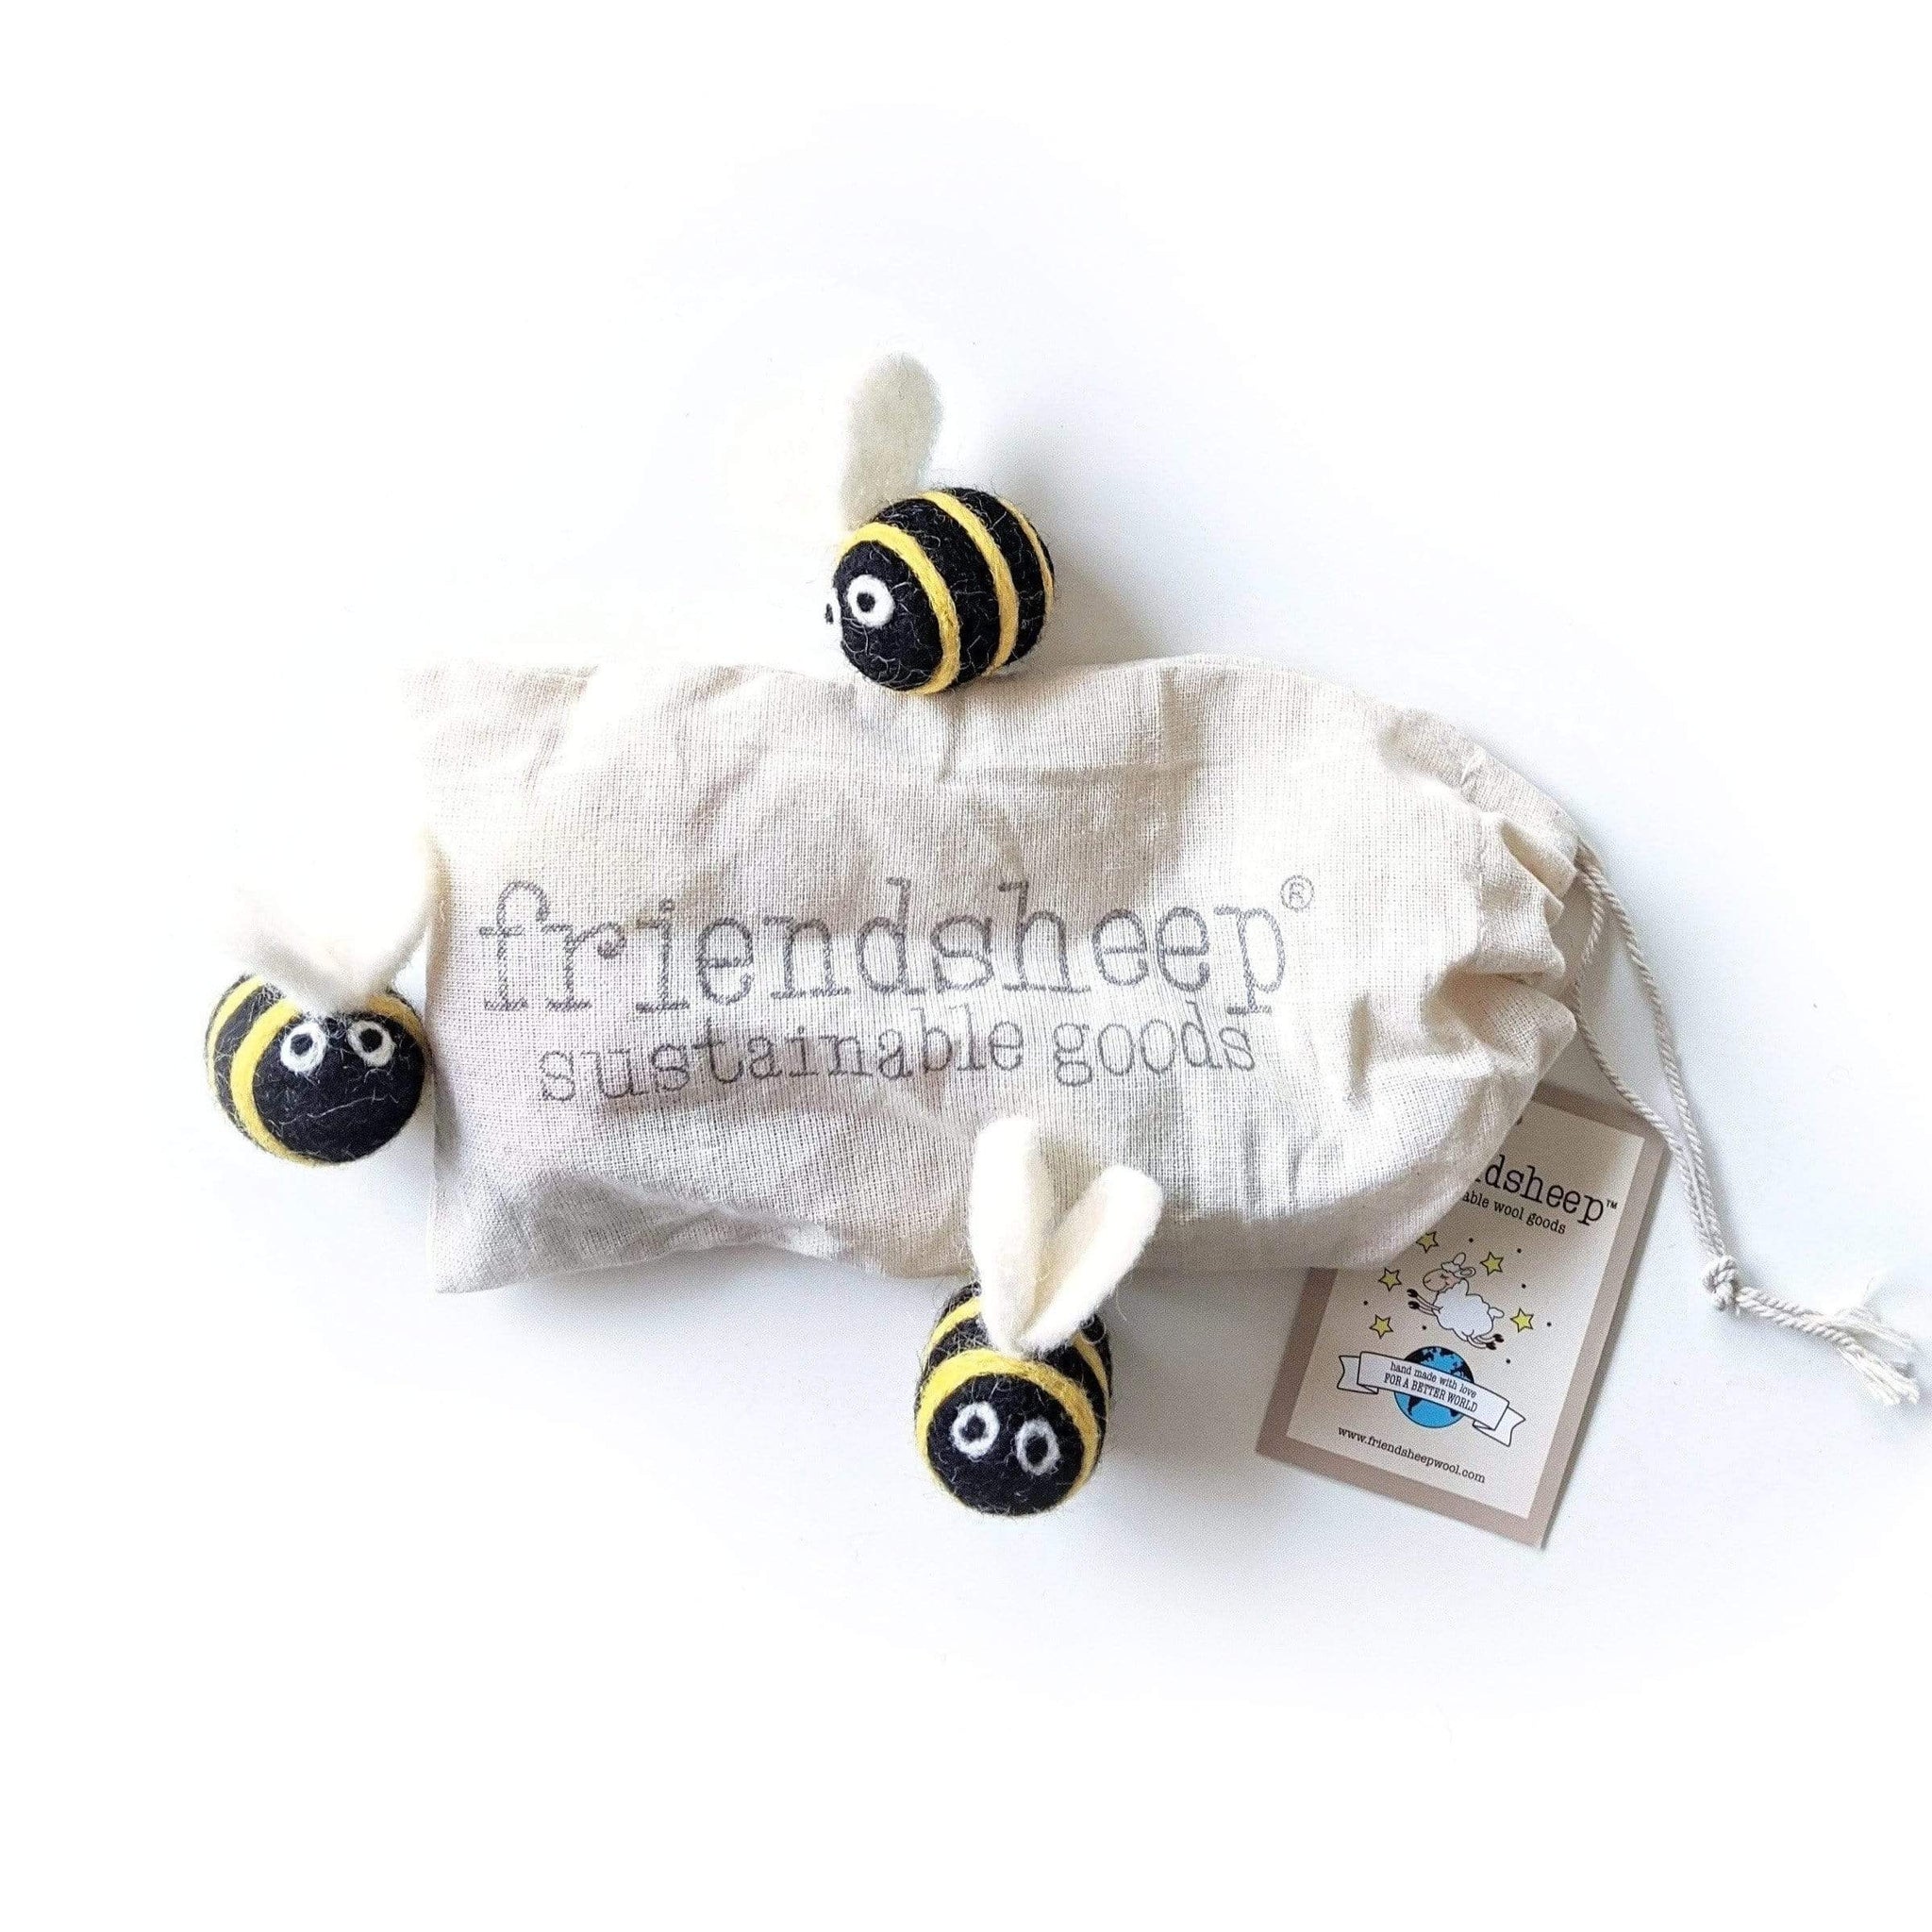 Berta the Honey Bee and Sisters Cat Toys